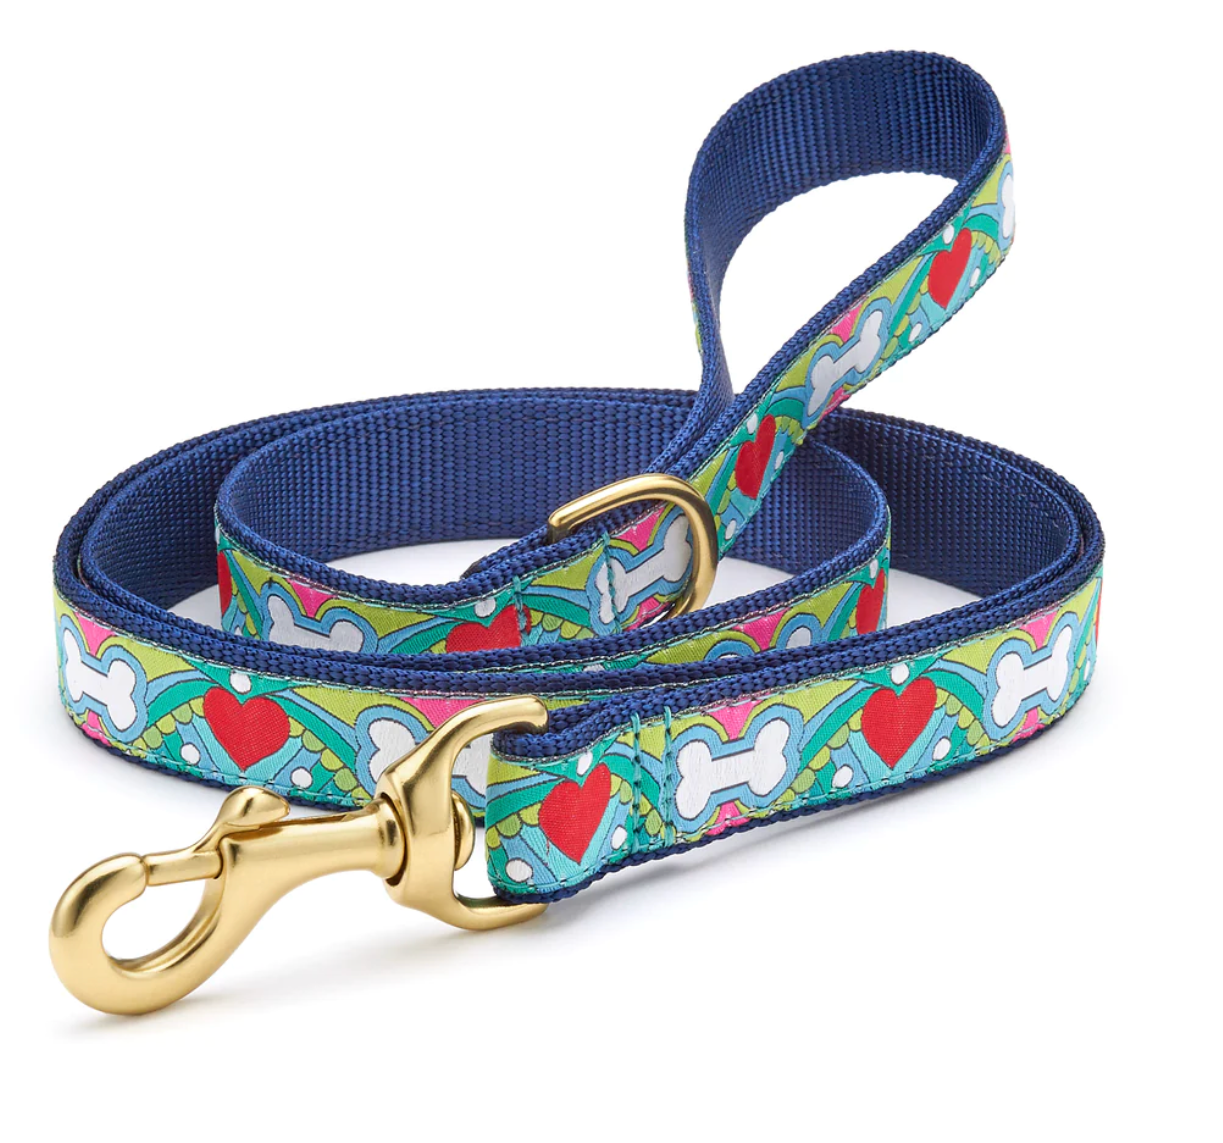 Coloring Book Dog Leads & Collars